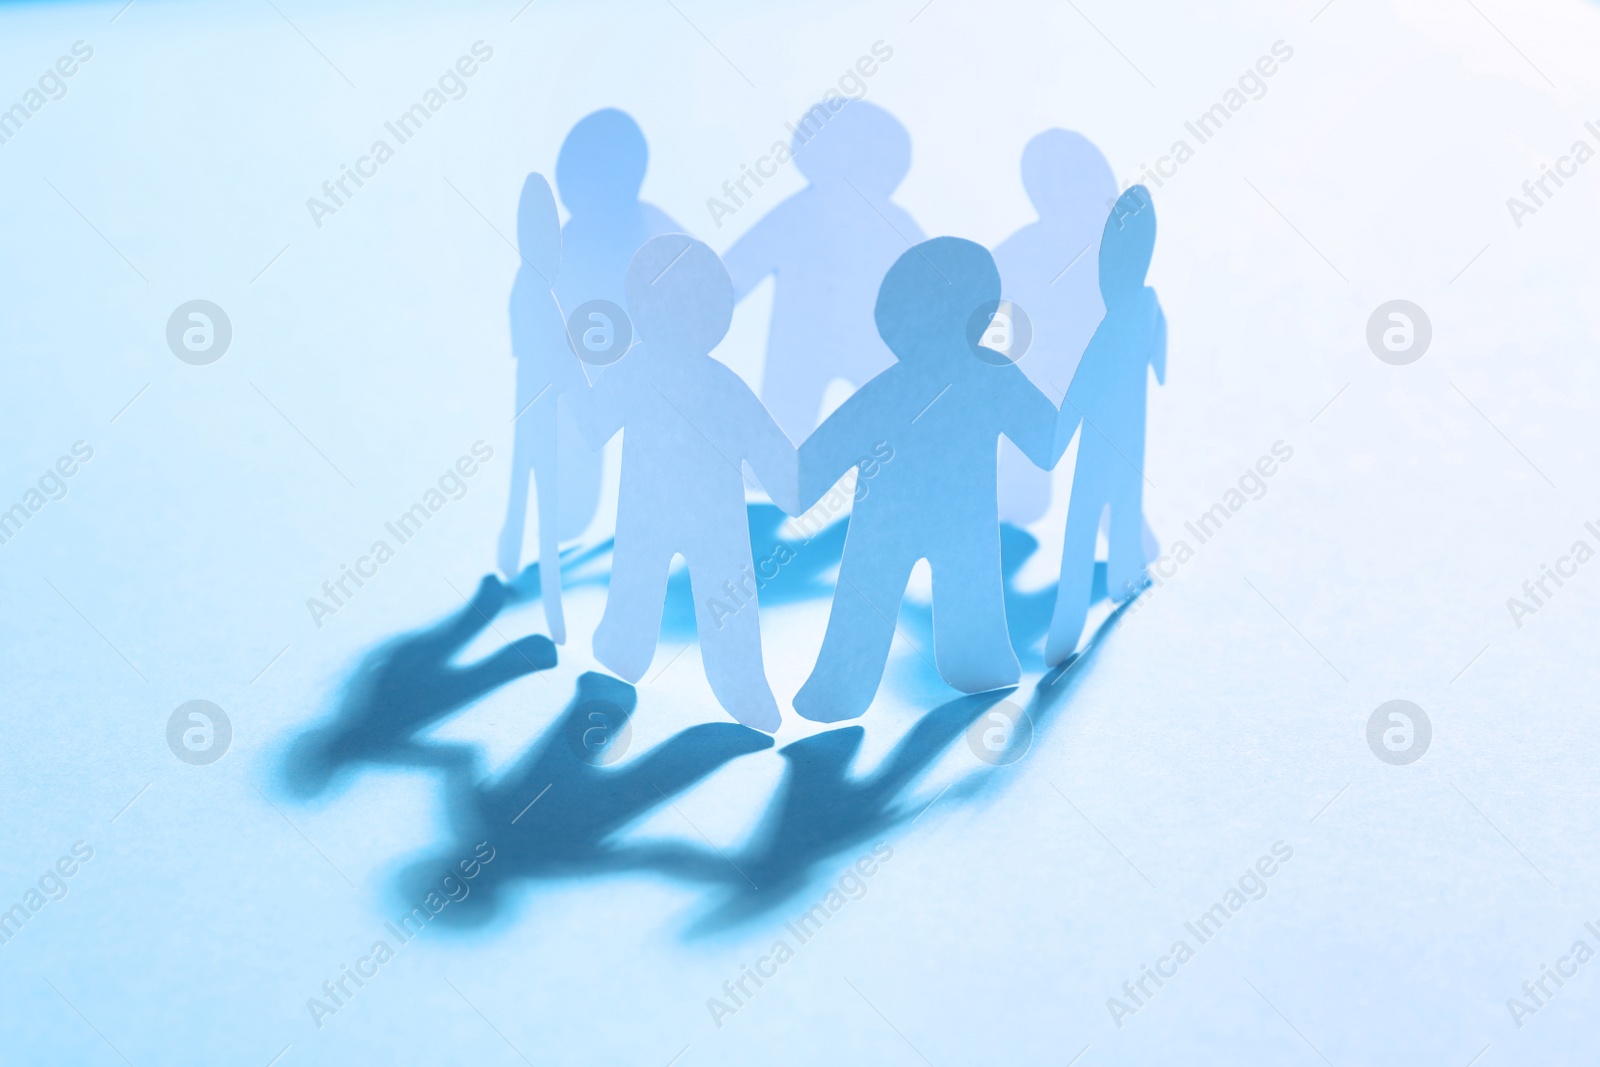 Photo of Paper people chain making circle on light blue background. Unity concept